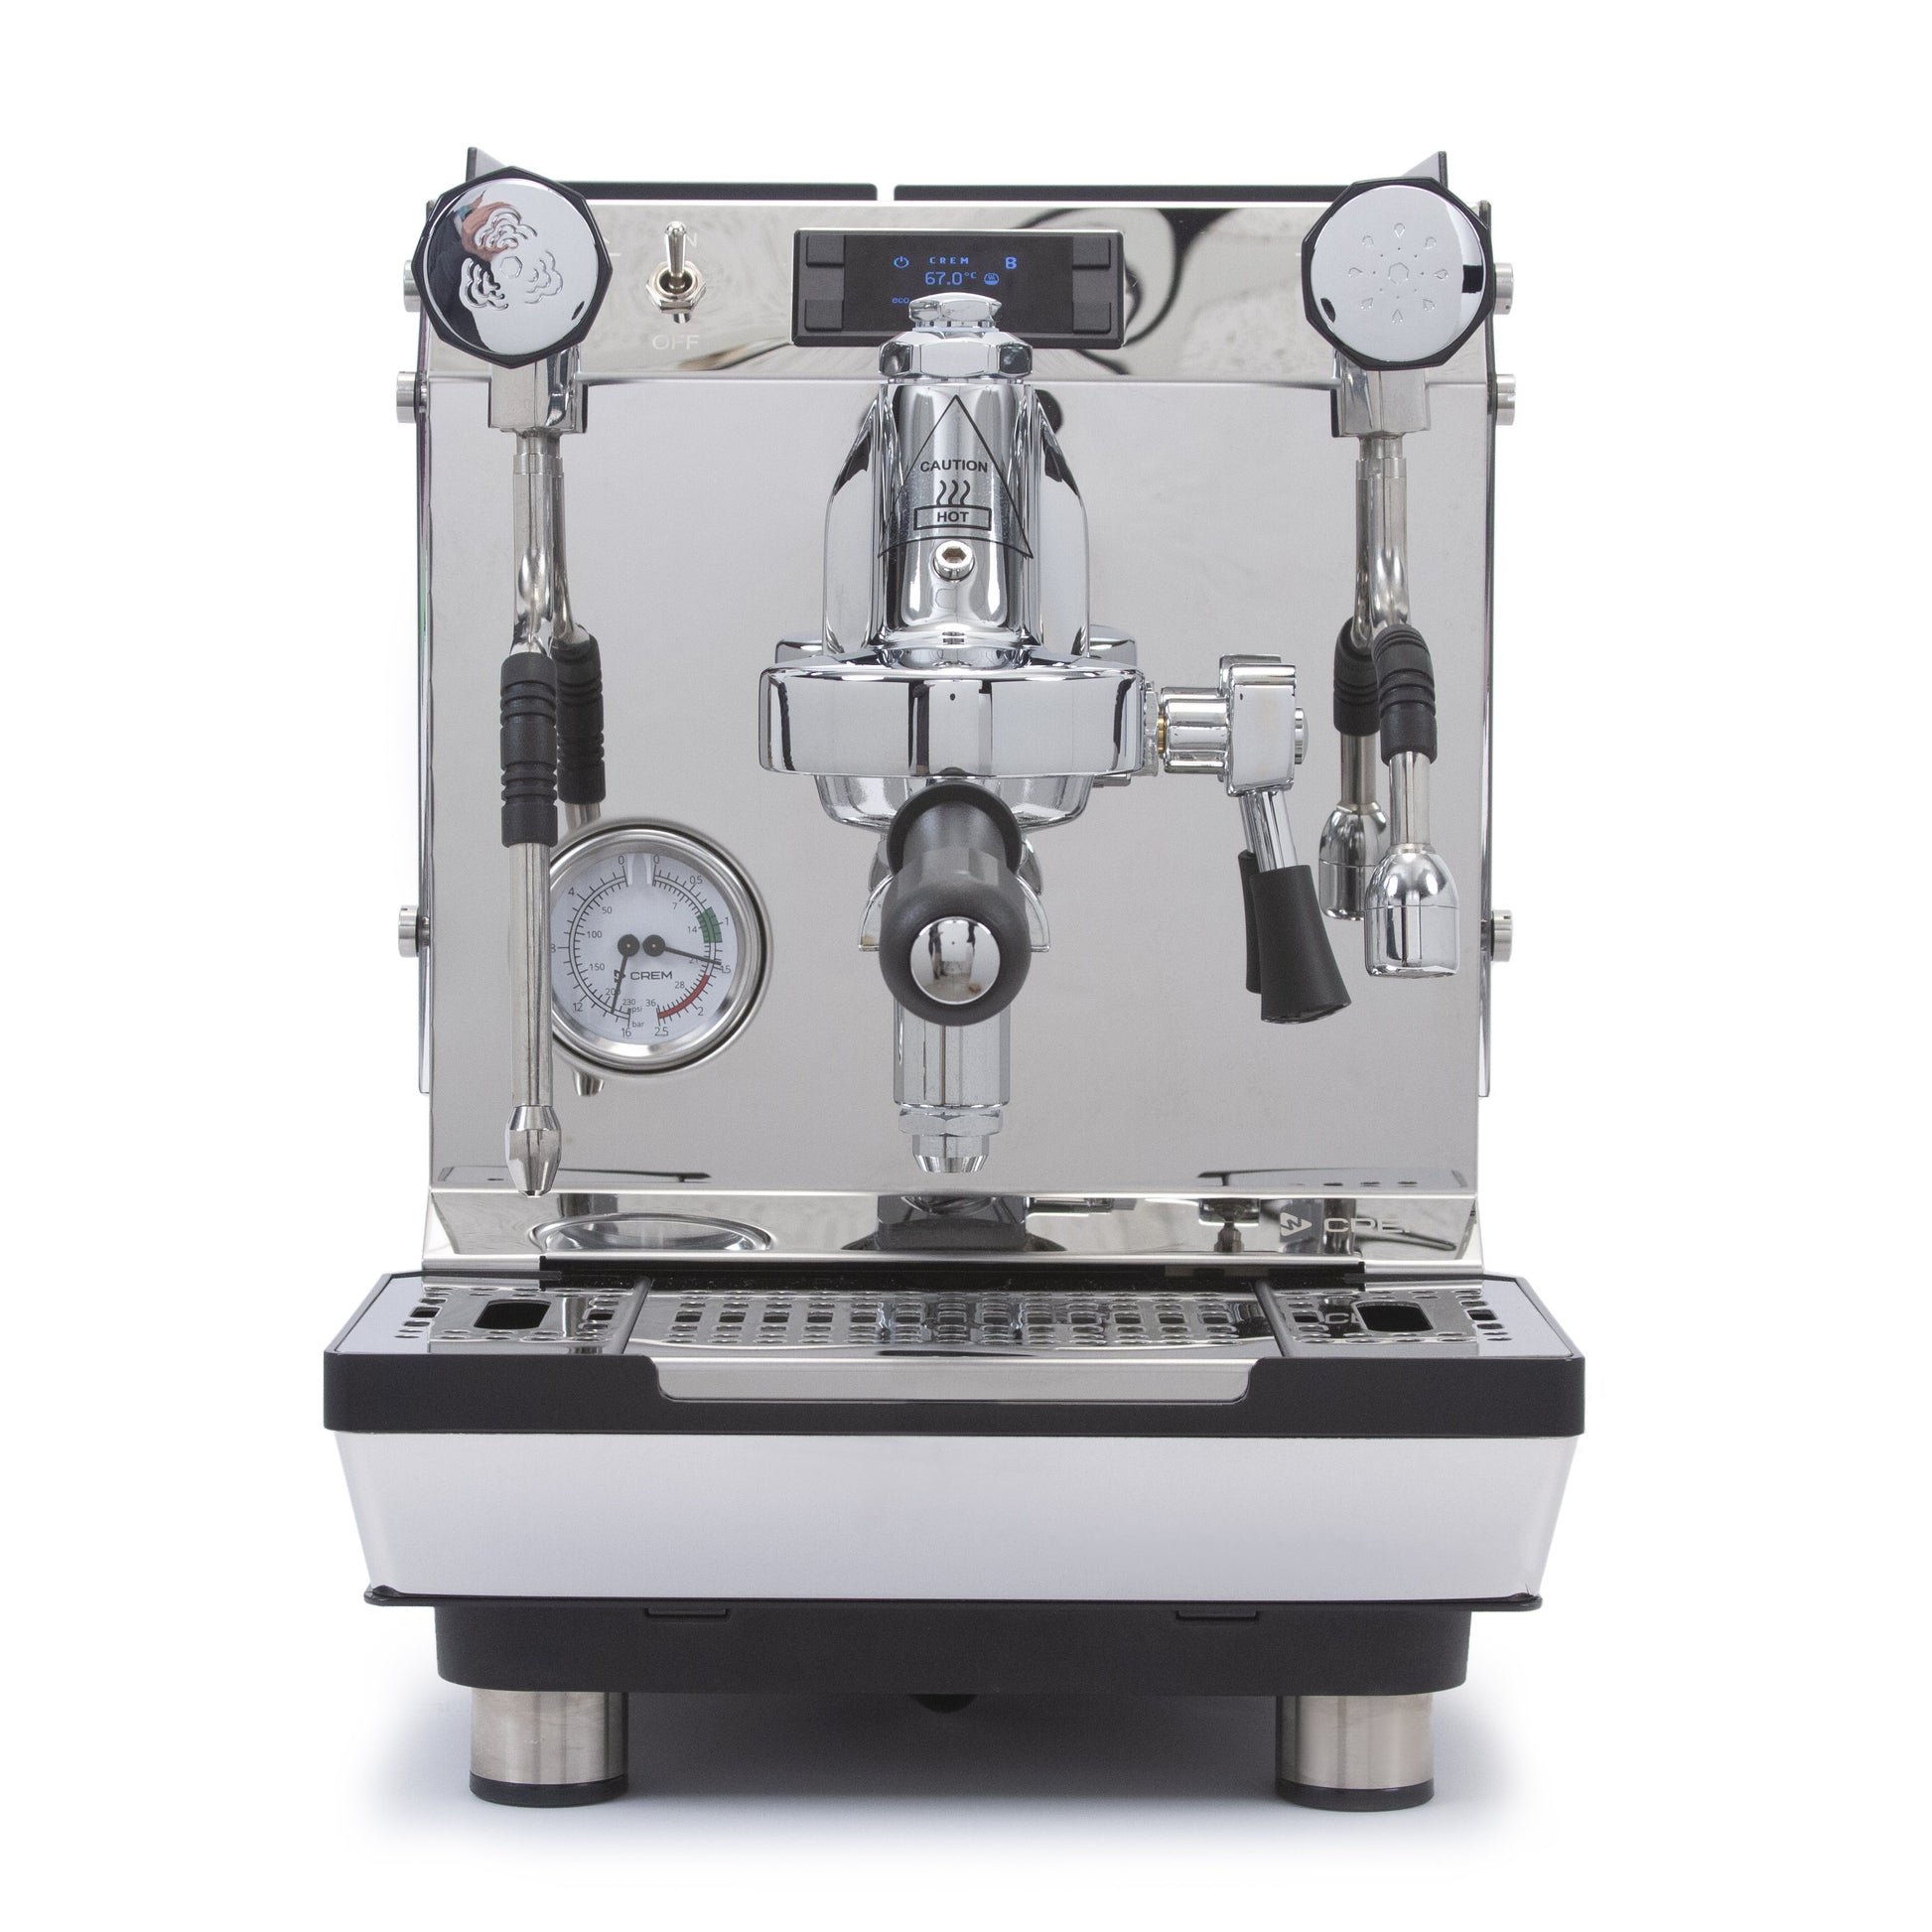 CREM ONE DUO-V dual boiler espresso machine from the front.